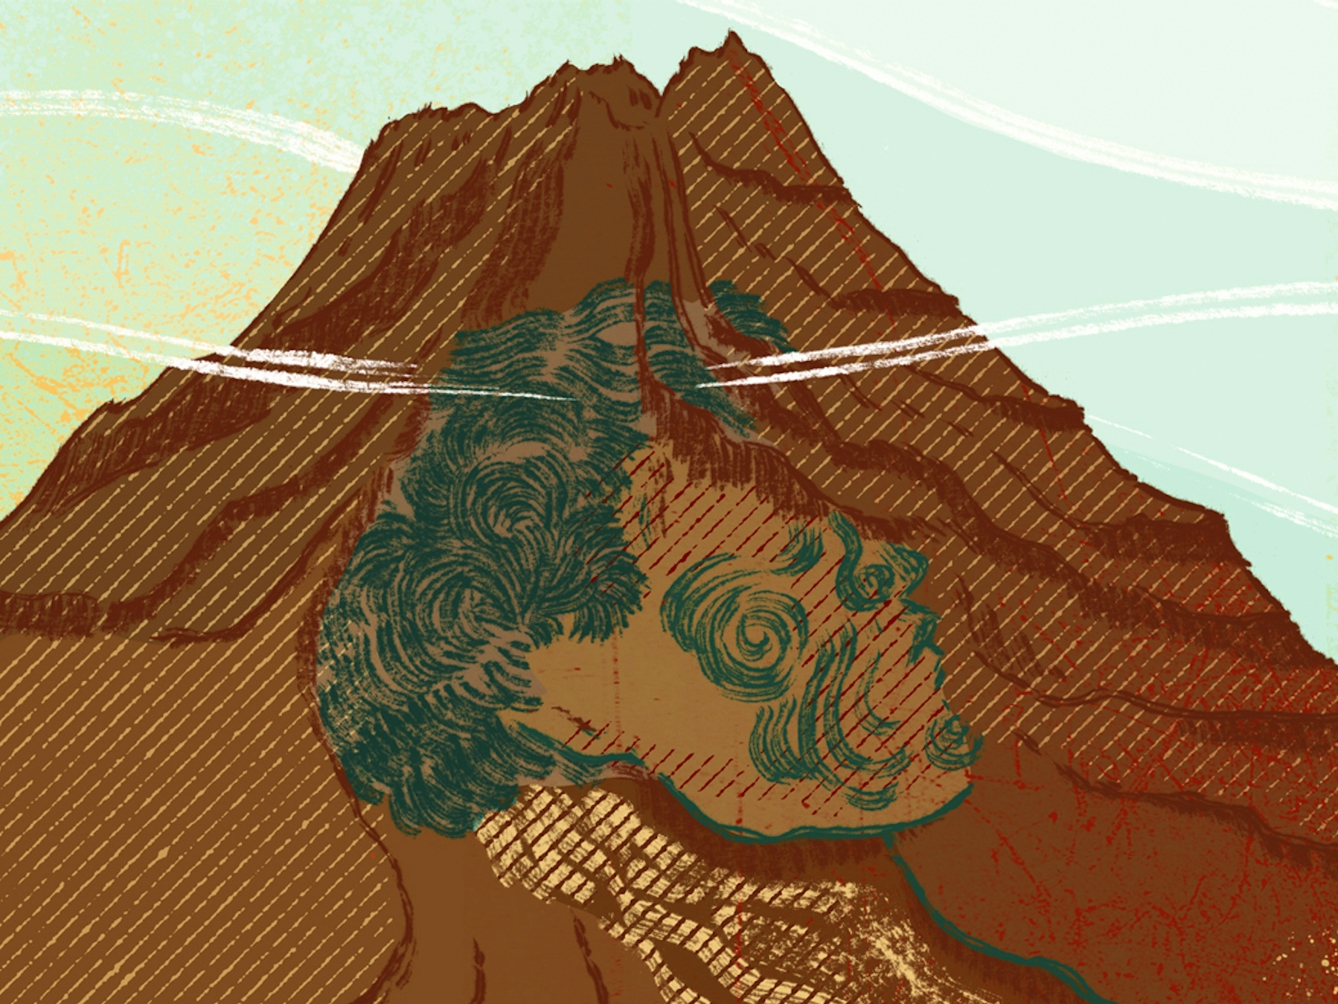 A digital illustration of landscape scene, the main feature of which is the peak of a large mountain. On the side of the mountain there is a depiction of a man's head in profile looking over the land, the man has the traditional face decoration of Maori culture. 